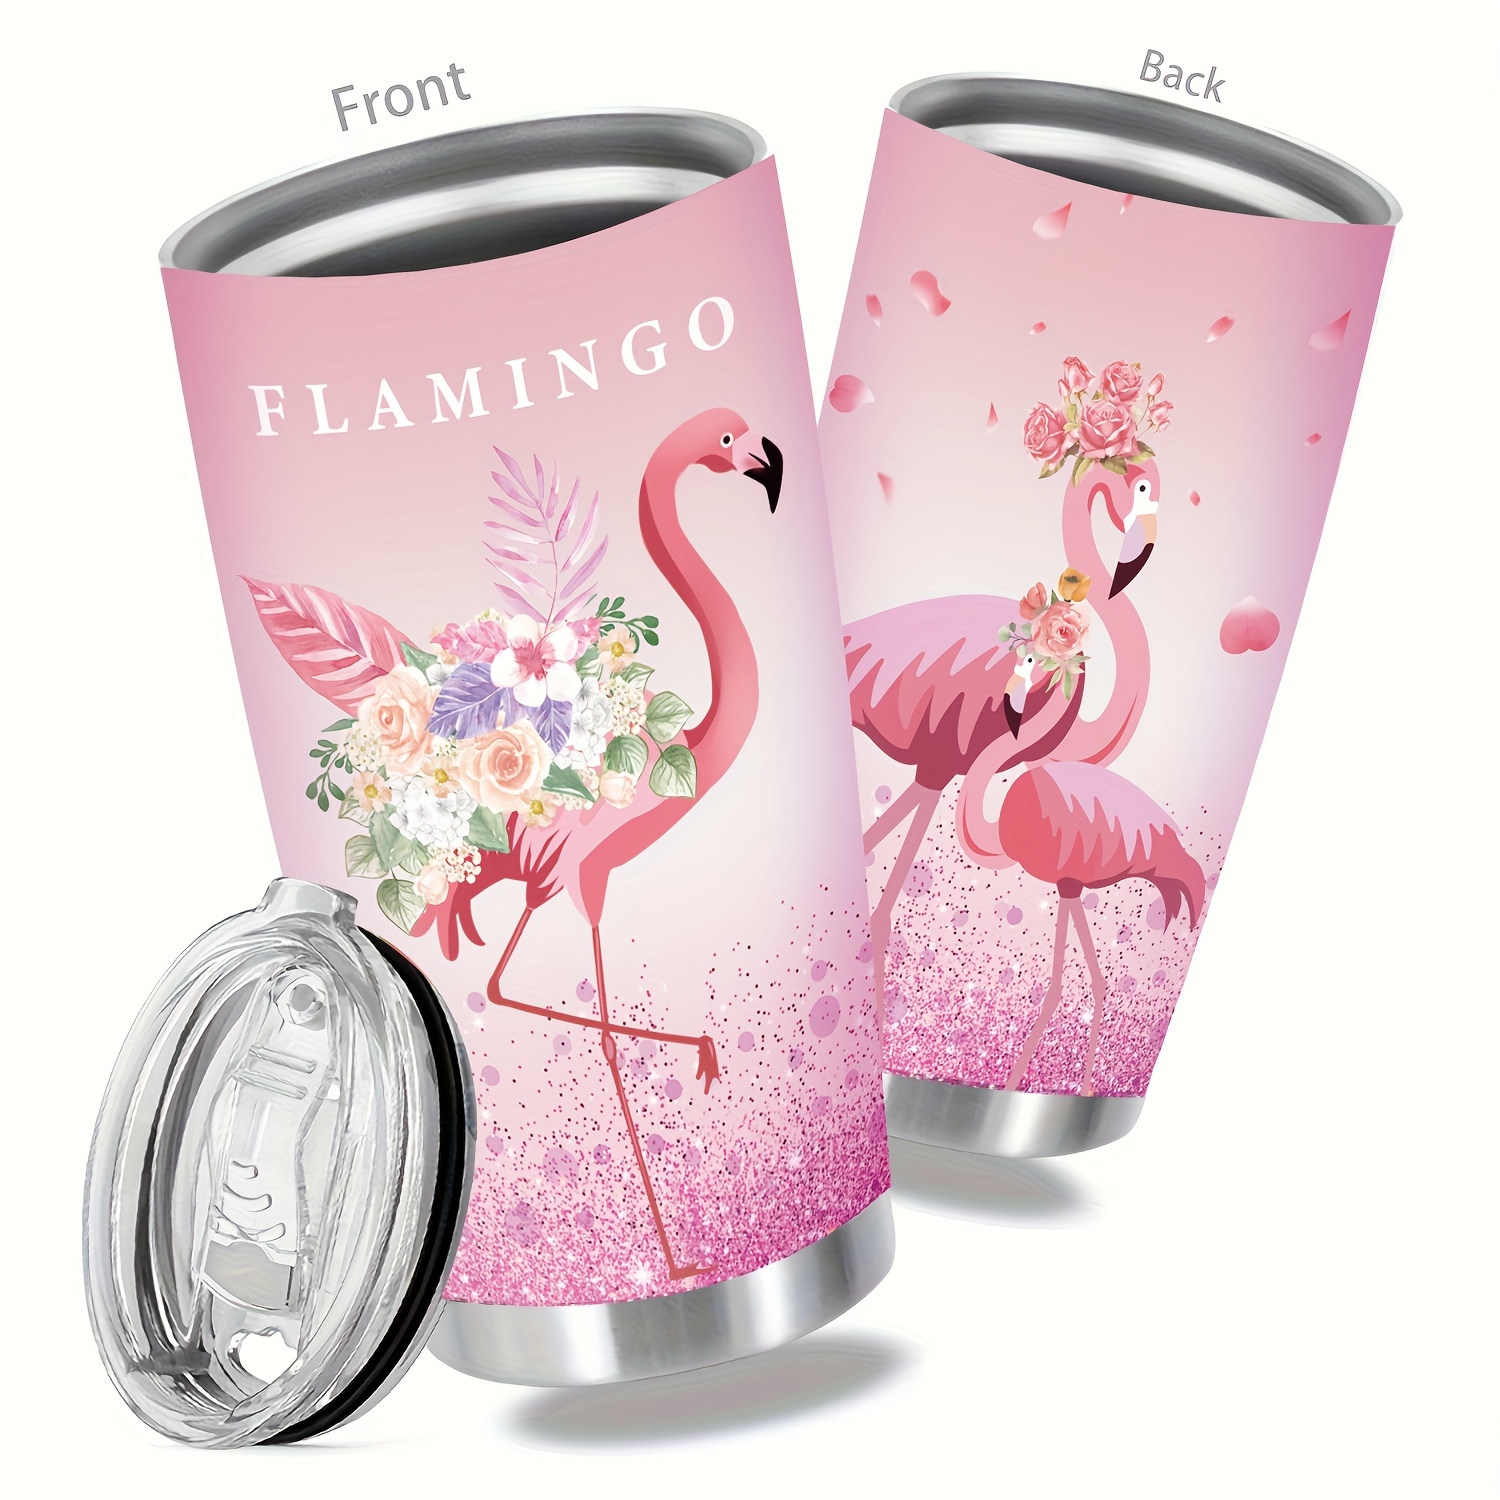 

Flamingo 20oz Insulated Tumbler - Stainless Steel Travel Cup With Lid, Reusable Coffee Mug, Bpa-free, Dual Wall Vacuum, Sweat Proof, Hand Wash Only - Multipurpose Use Without Electricity